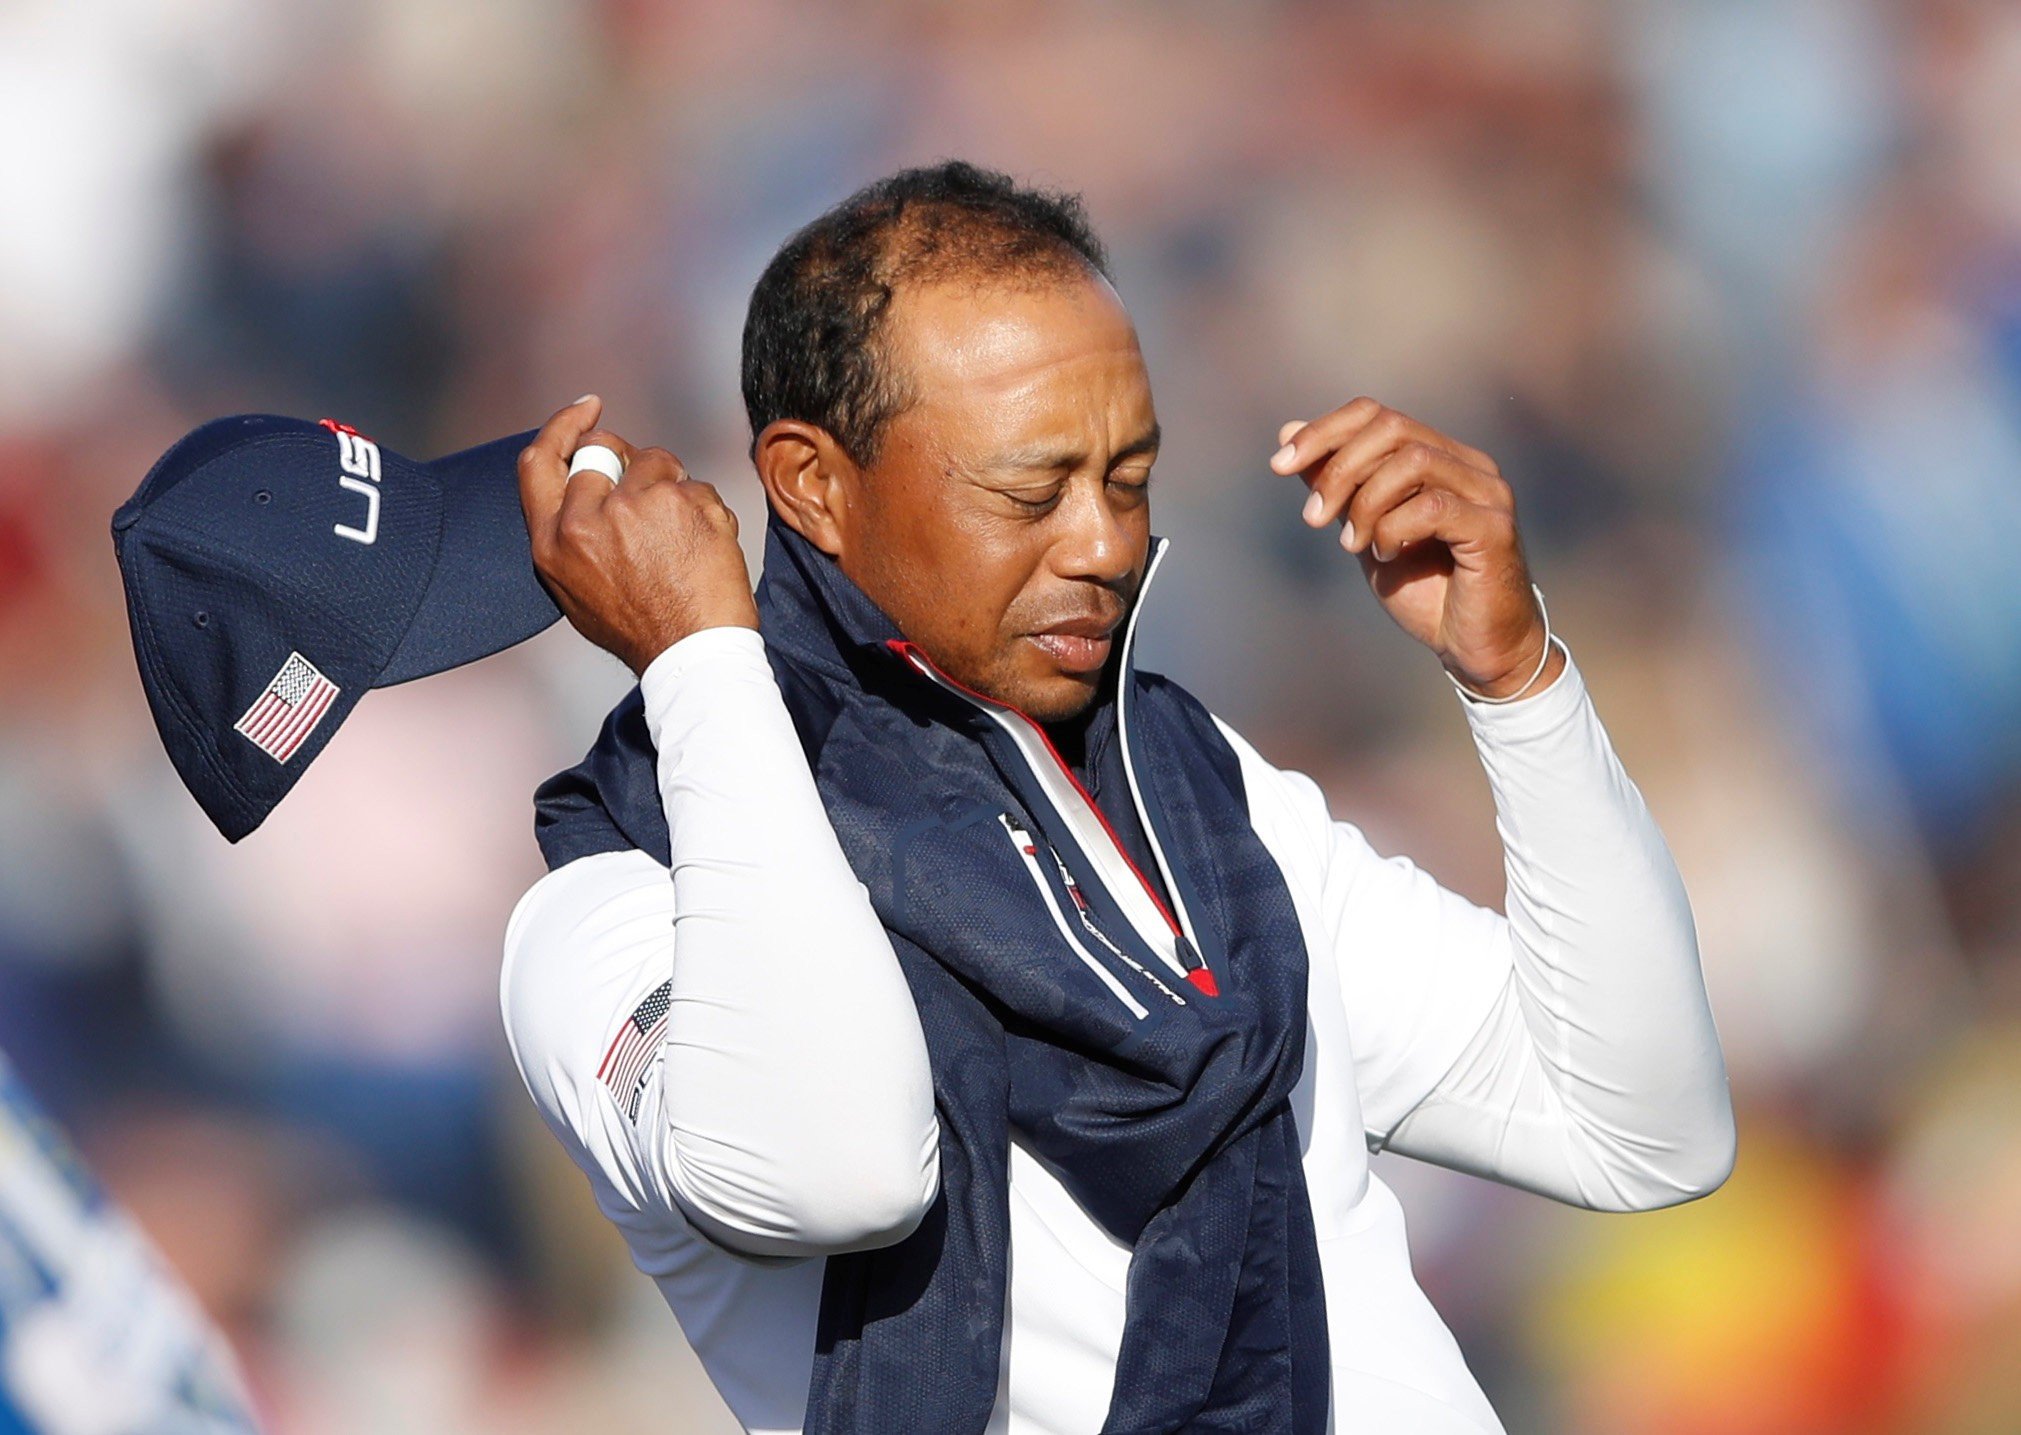 Tiger Woods during a chastening day at the Ryder Cup on Saturday. Photo: Reuters